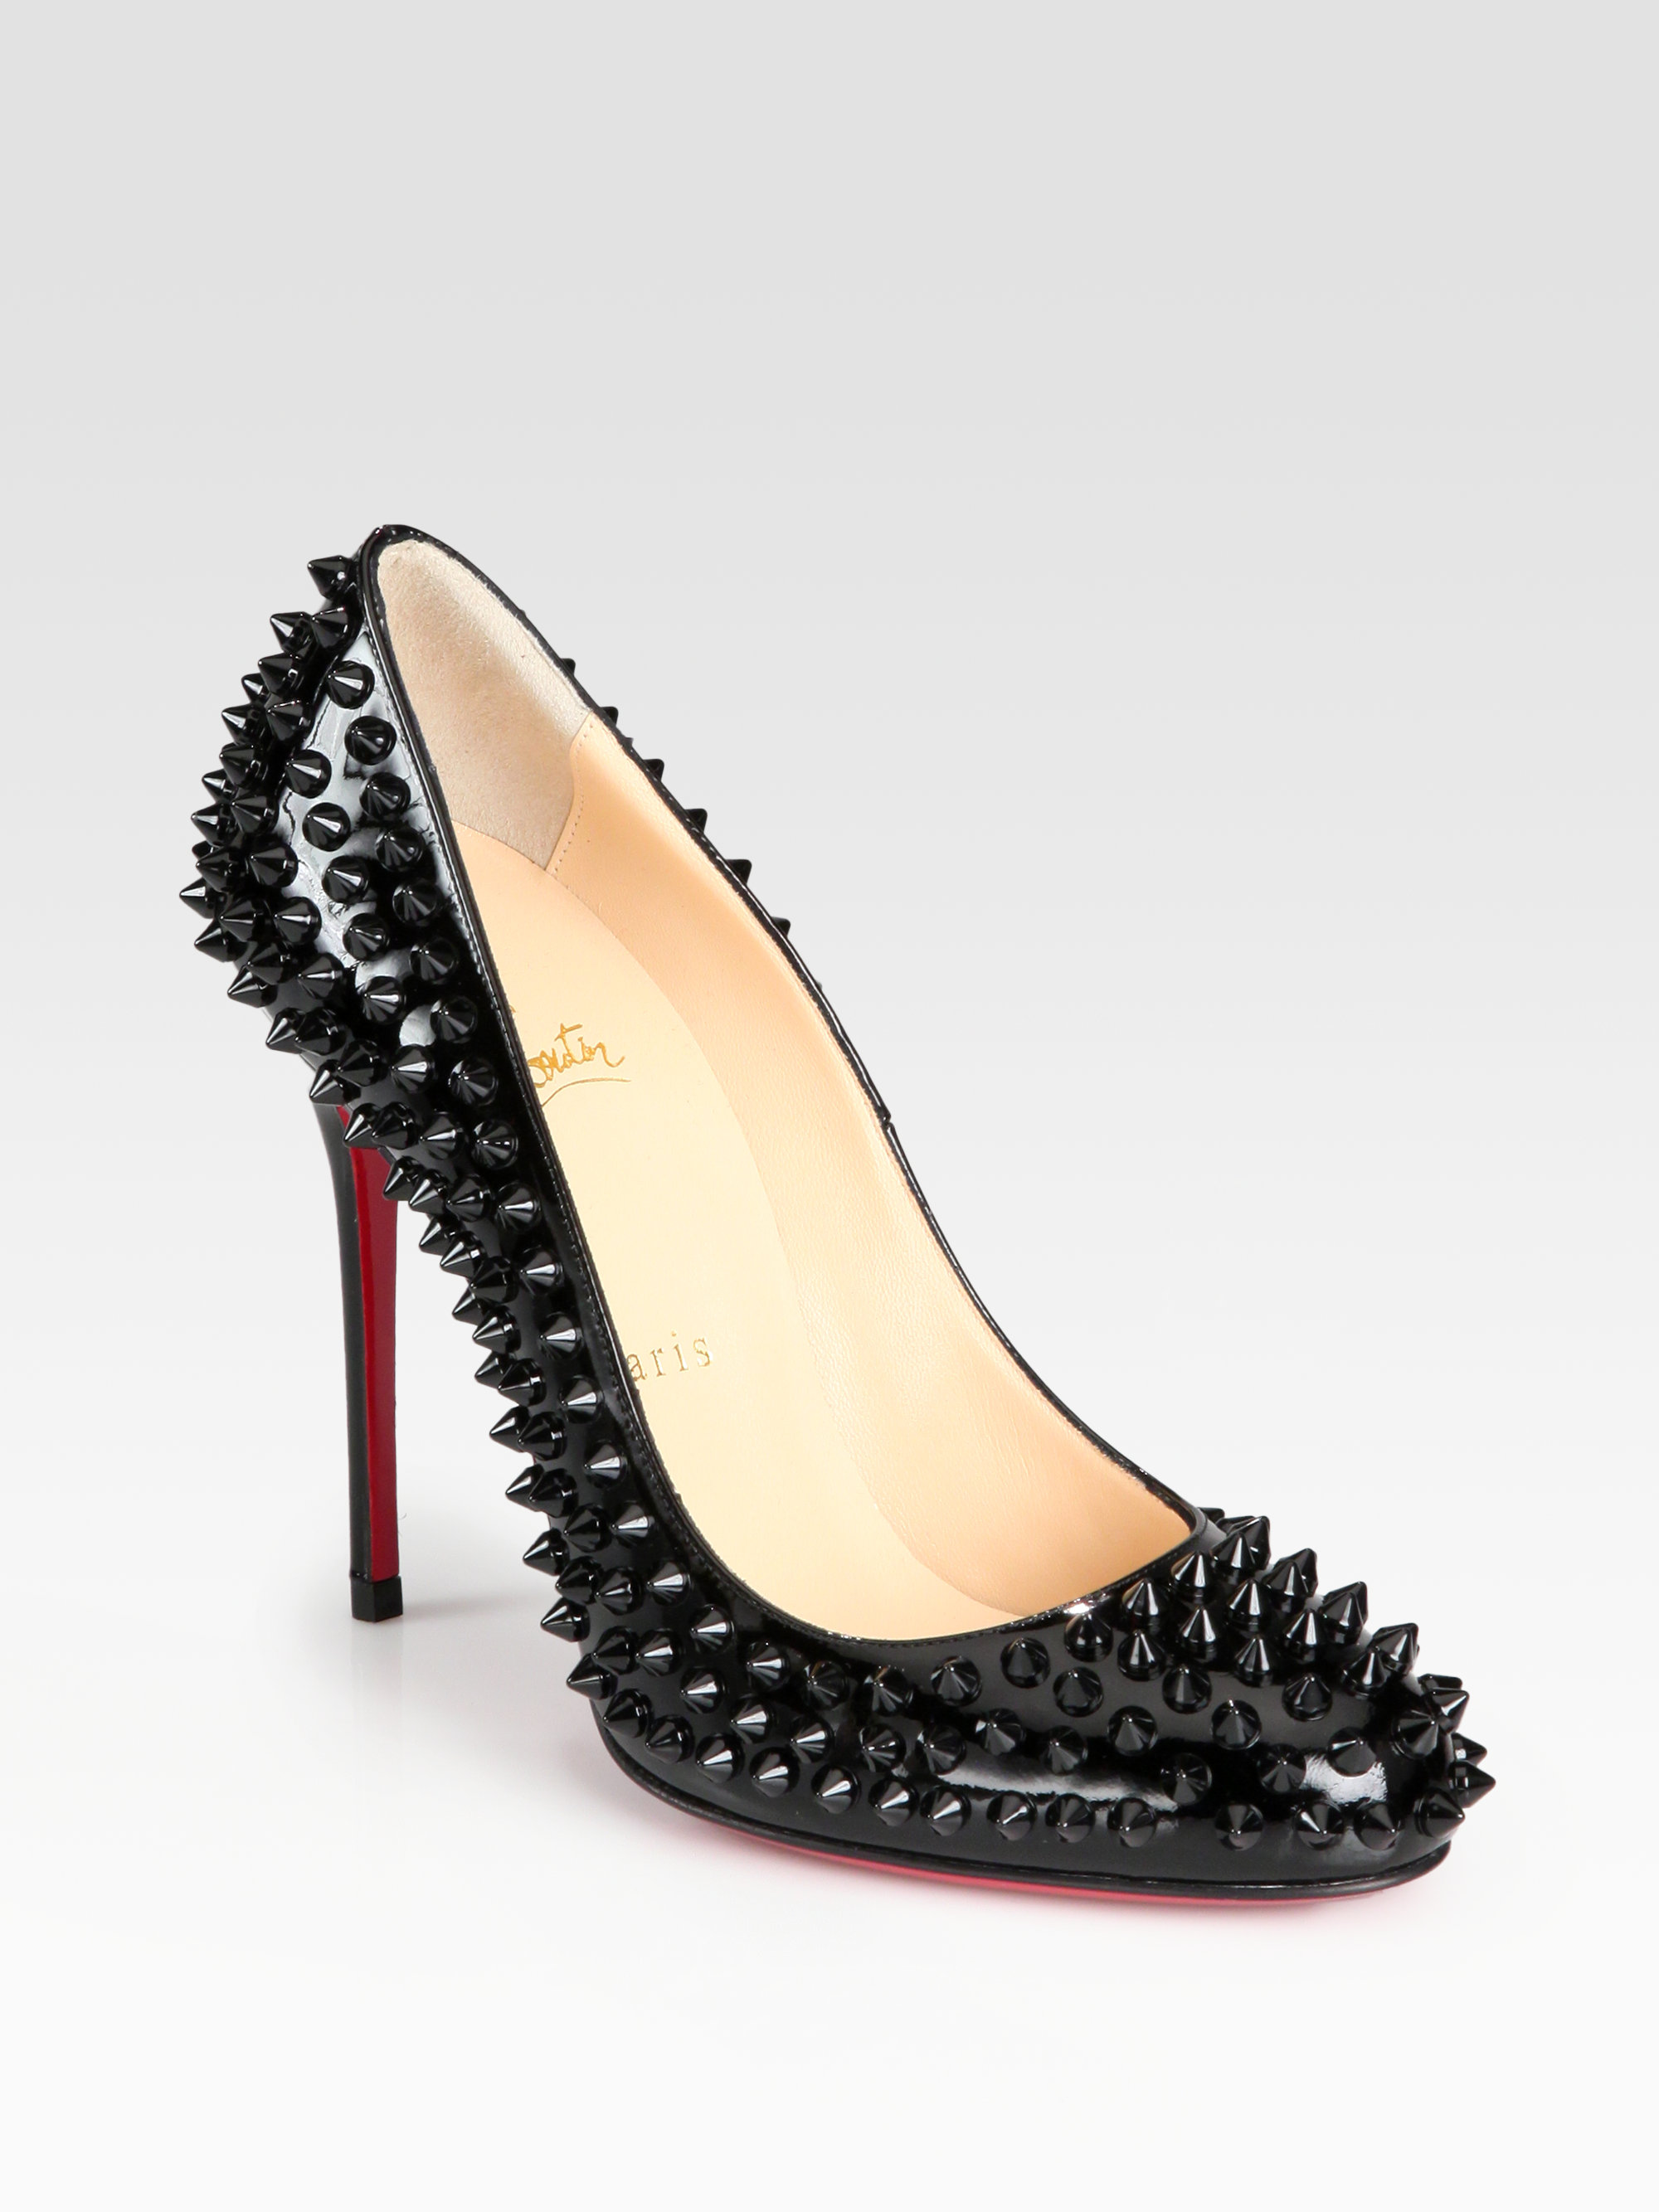 christian louboutin Fifi pumps Black patent leather covered heels ...